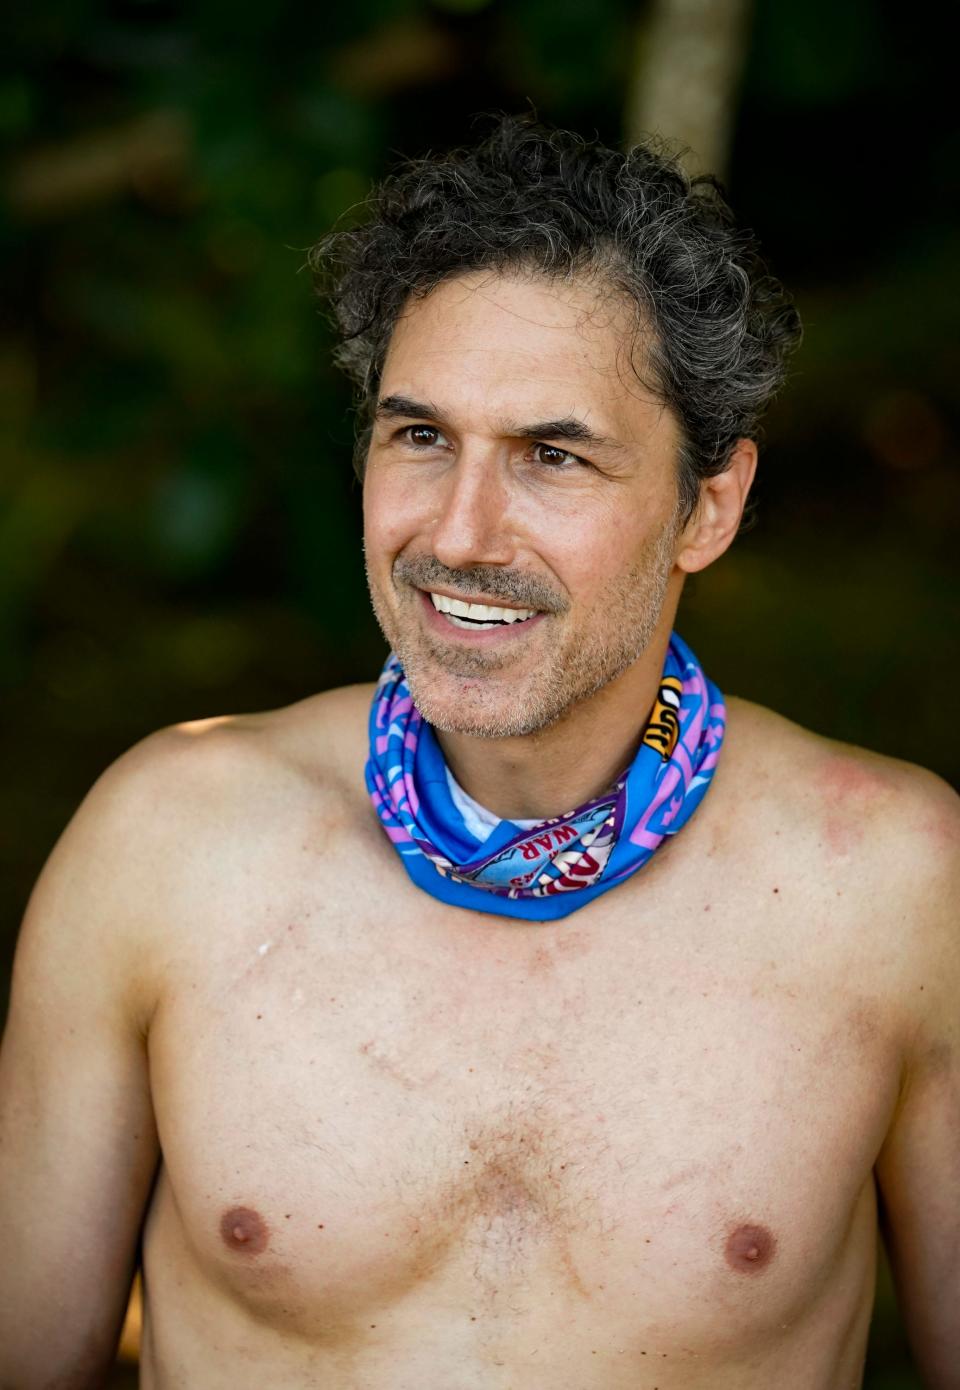 Ethan Zohn pictured while competing on "Survivor: Winners at War."